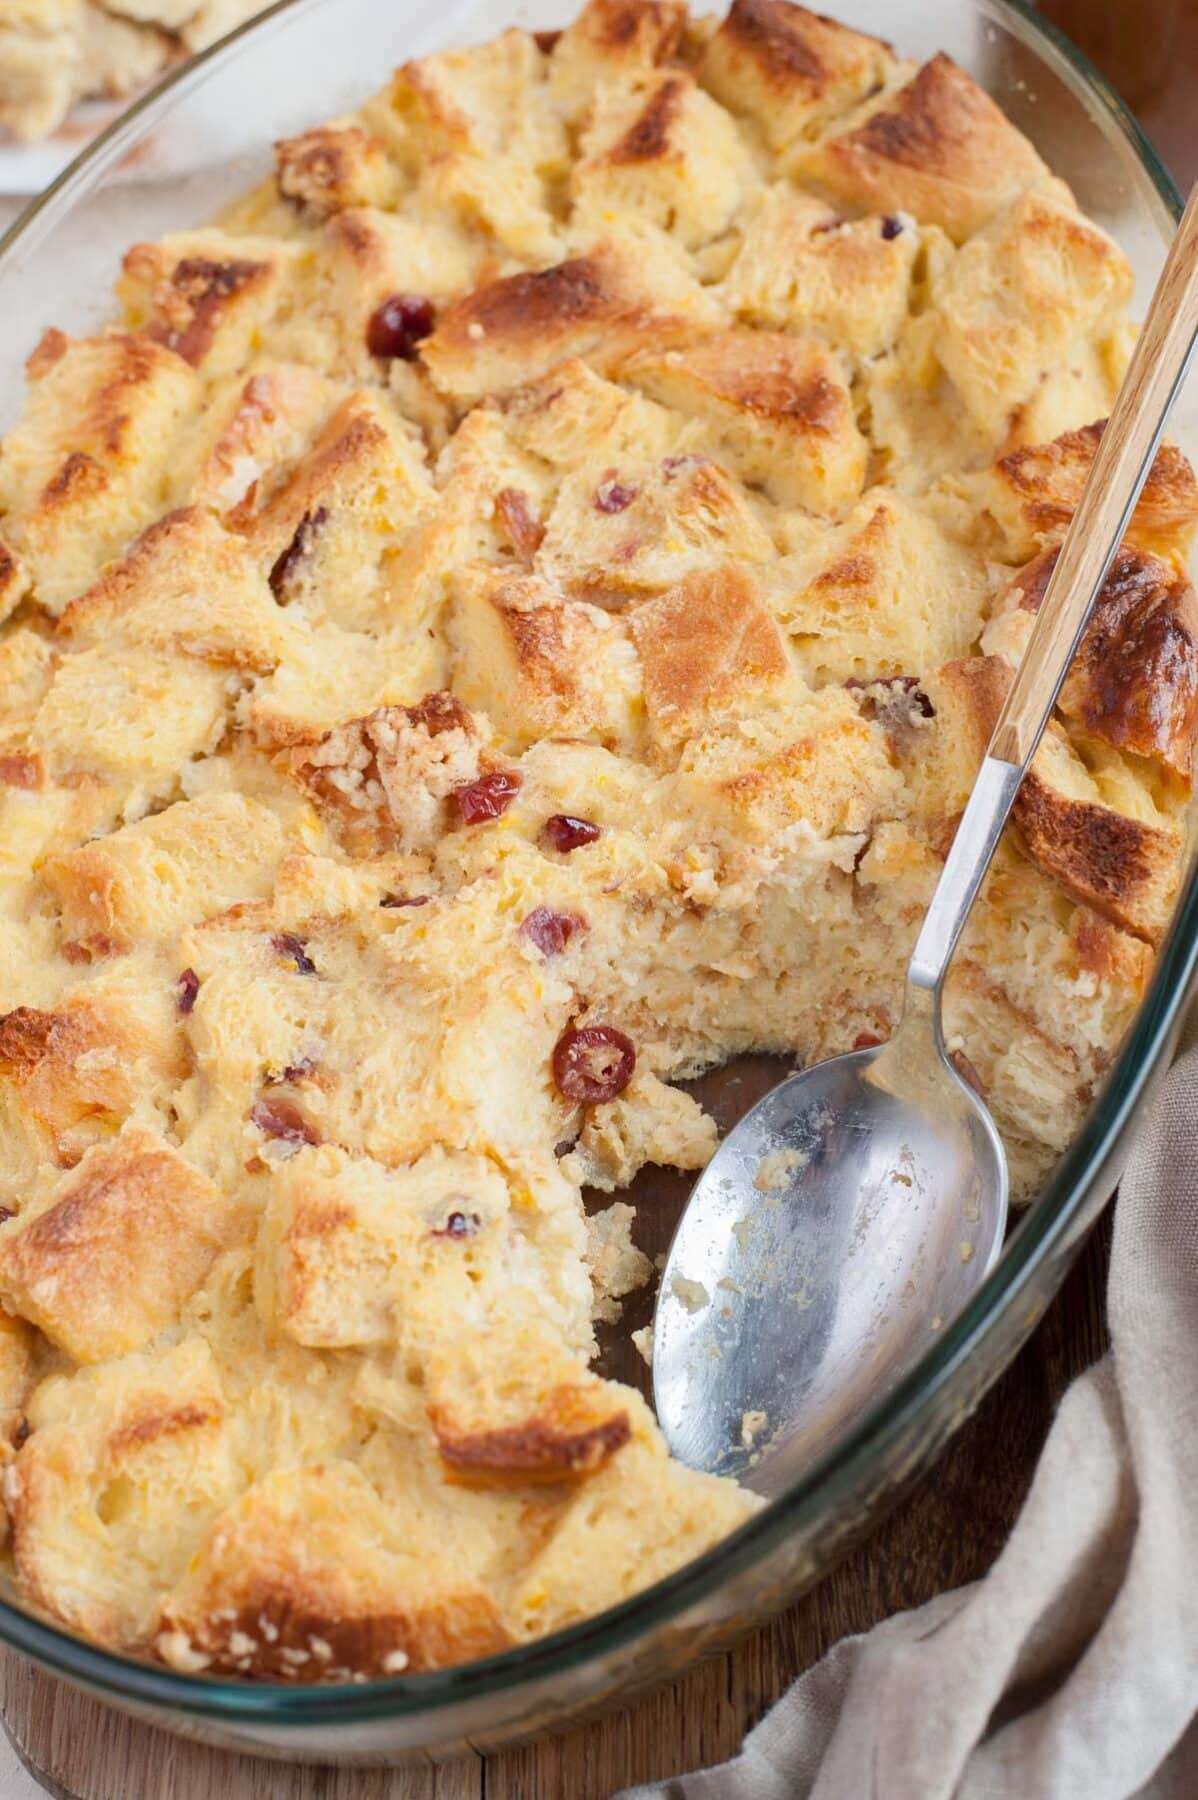 A close up photo of brioche bread pudding in a baking dish with a serving missing. A large spoon on the side.